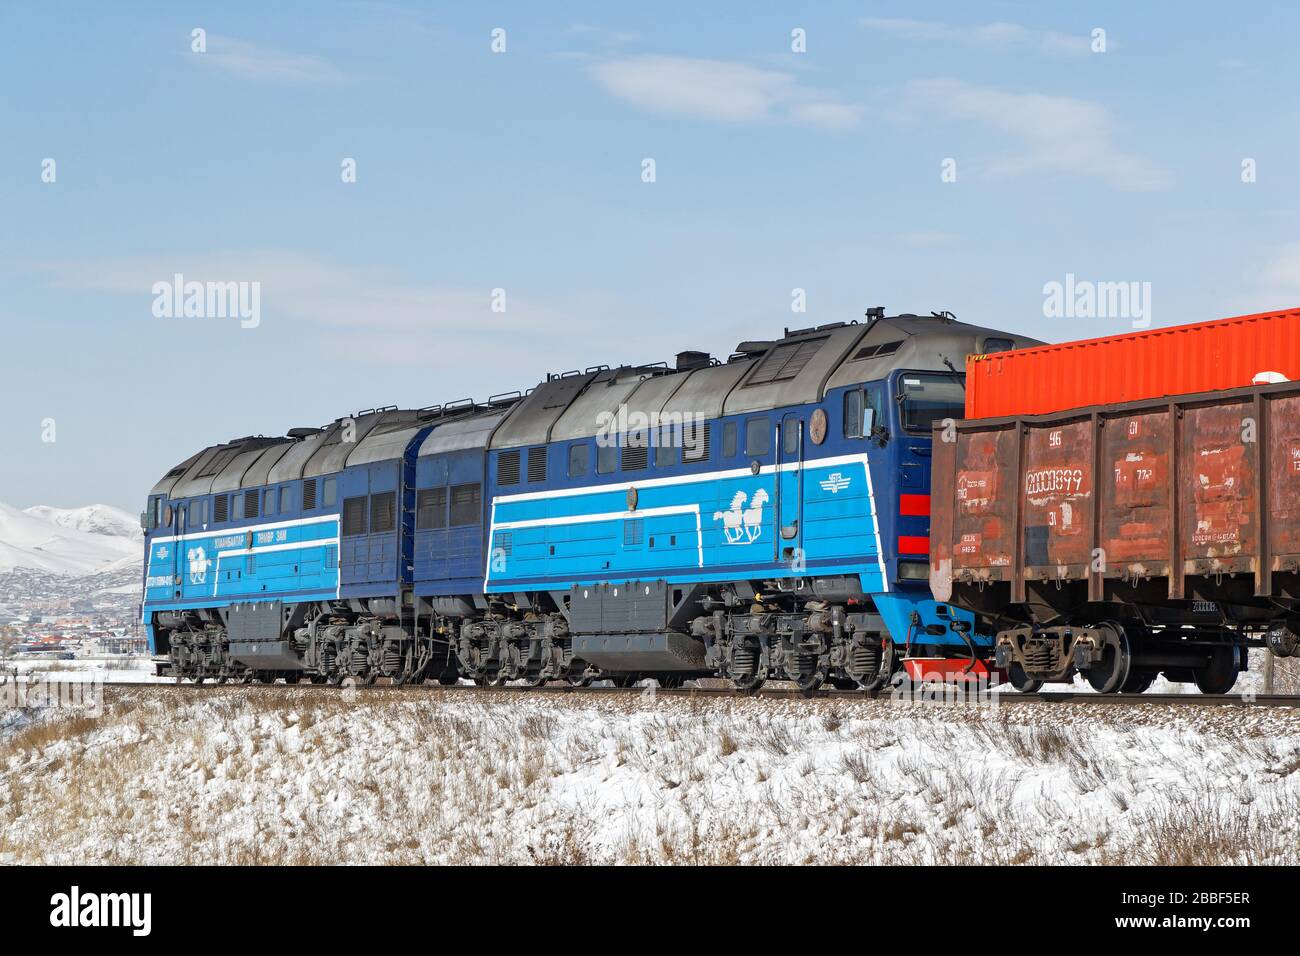 ULAANBAATAR, MONGOLIA, March 9, 2020 : Train arriving near Ulaanbaatar. Rail transport in Mongolia is an important means of travel in the country whic Stock Photo